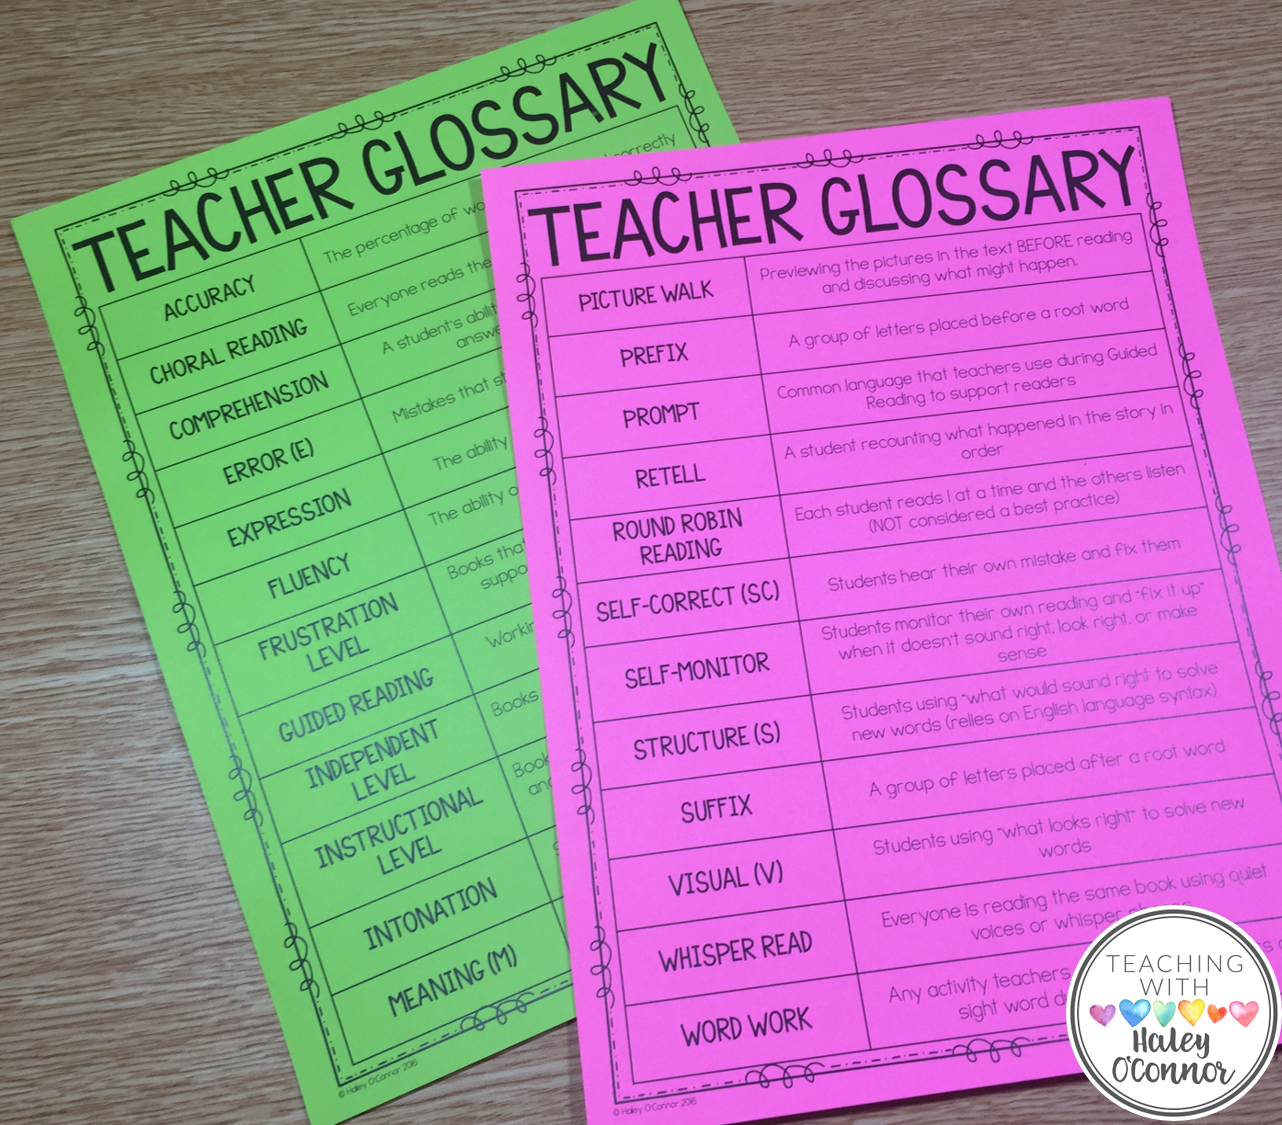 Teacher Glossary for Guided Reading